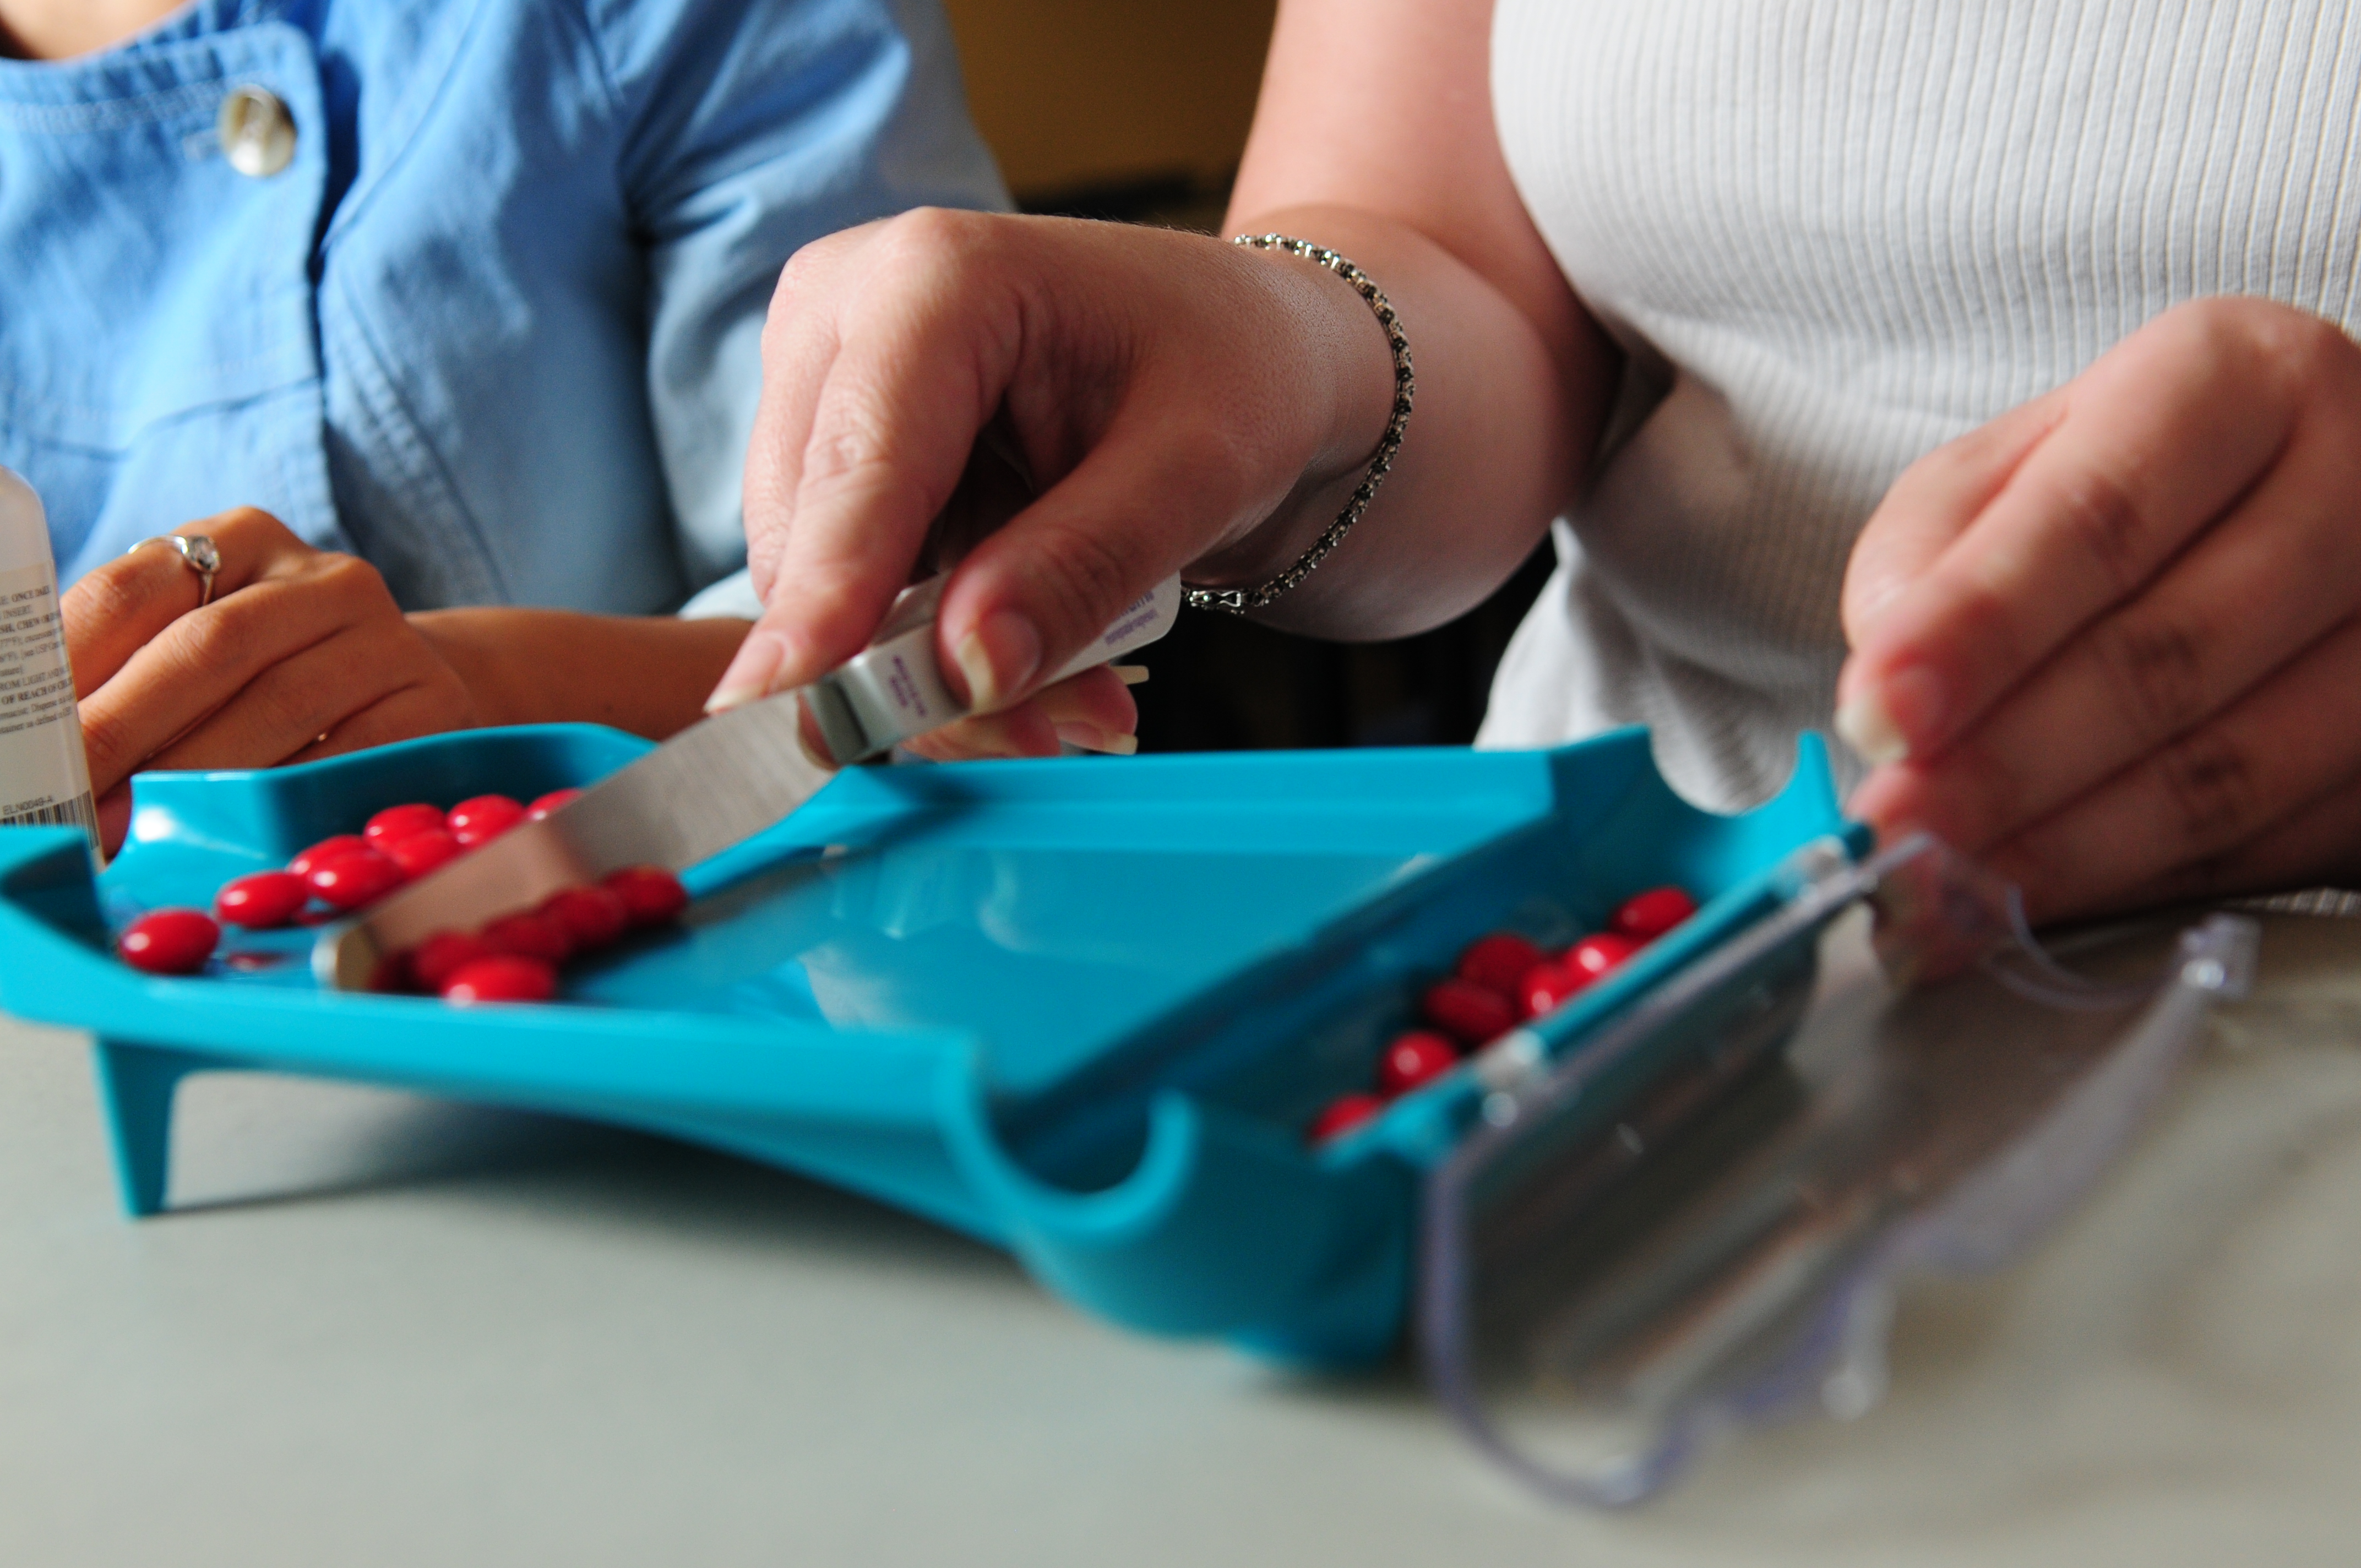 Student using a counting tray and spatula to count medication